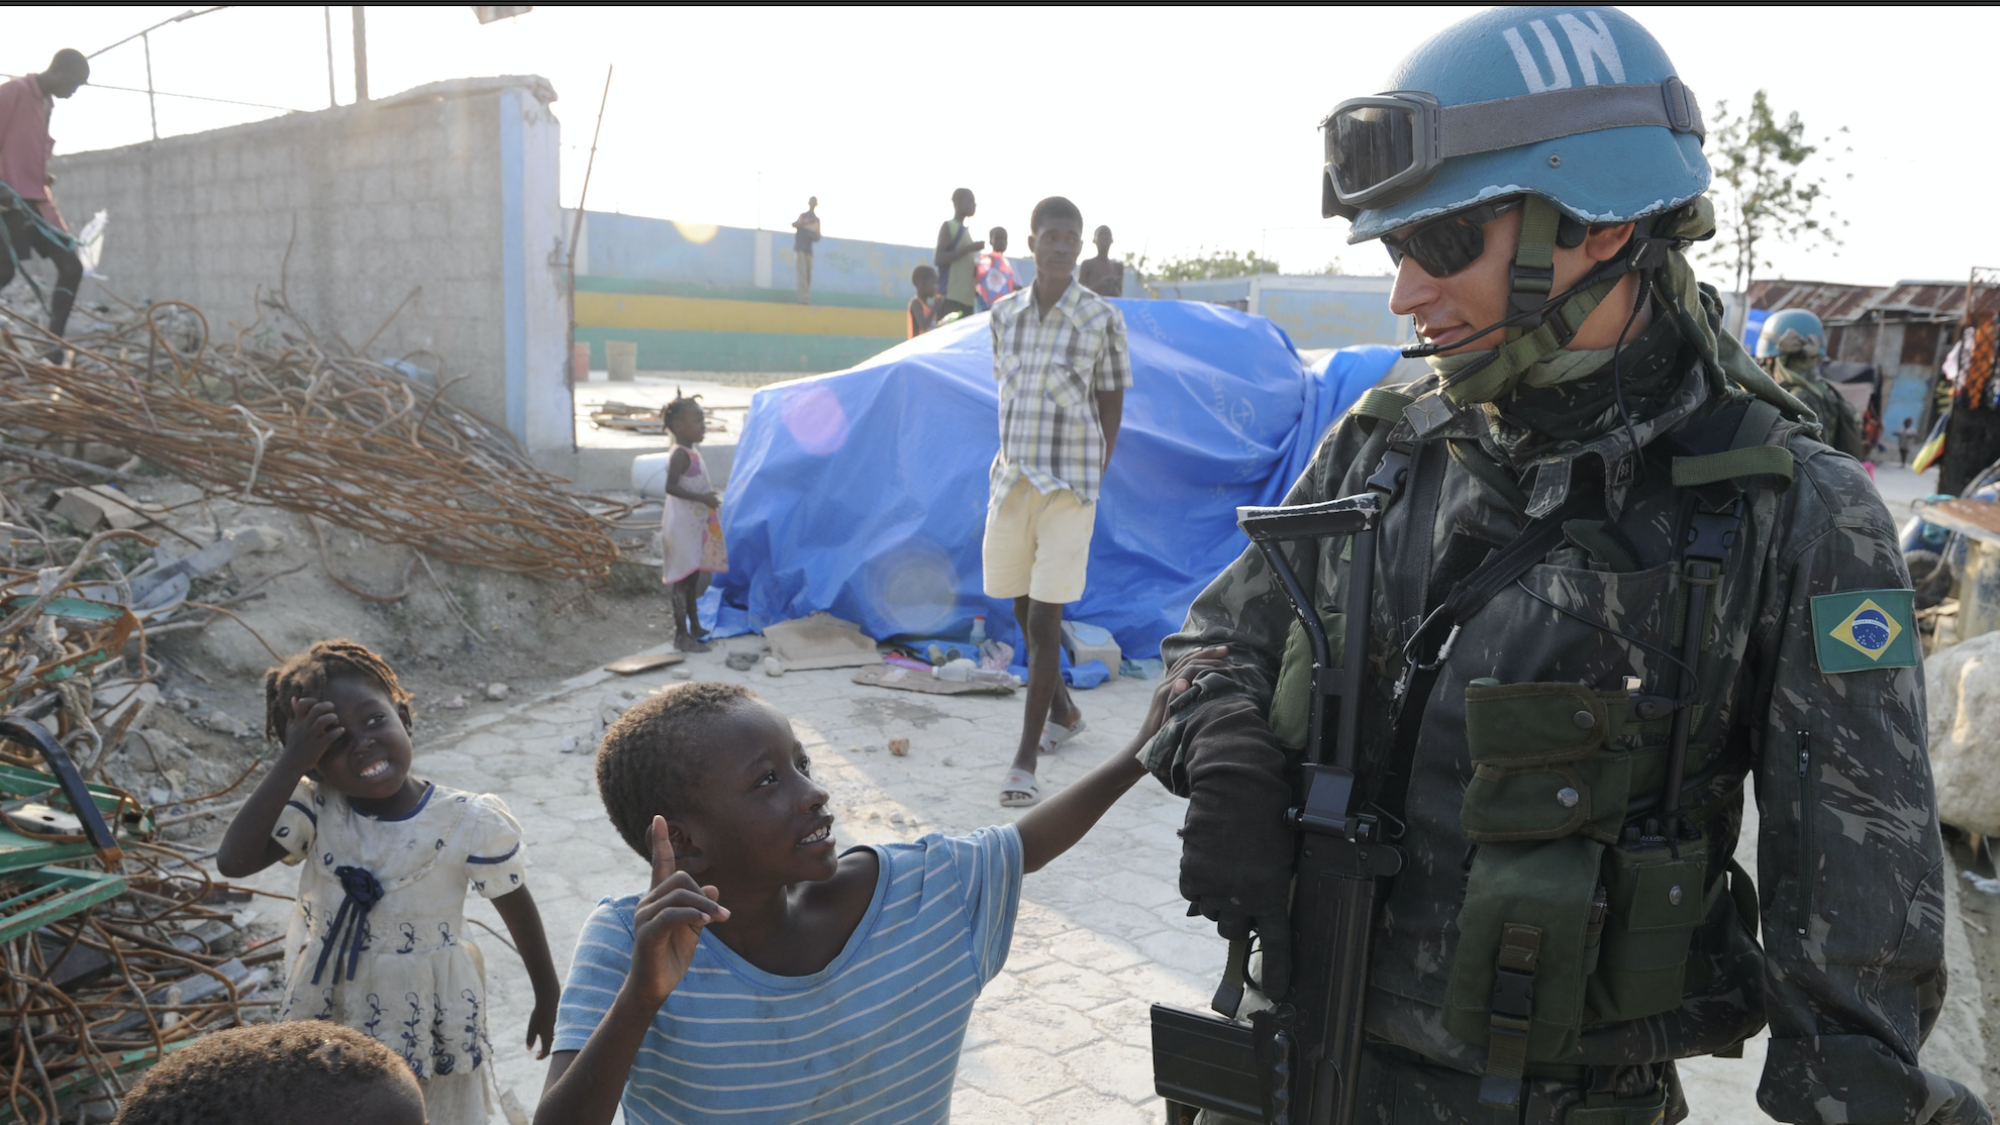 A tall male wearing a UN peacekeeper helmet says hello to some small children in Brazil.